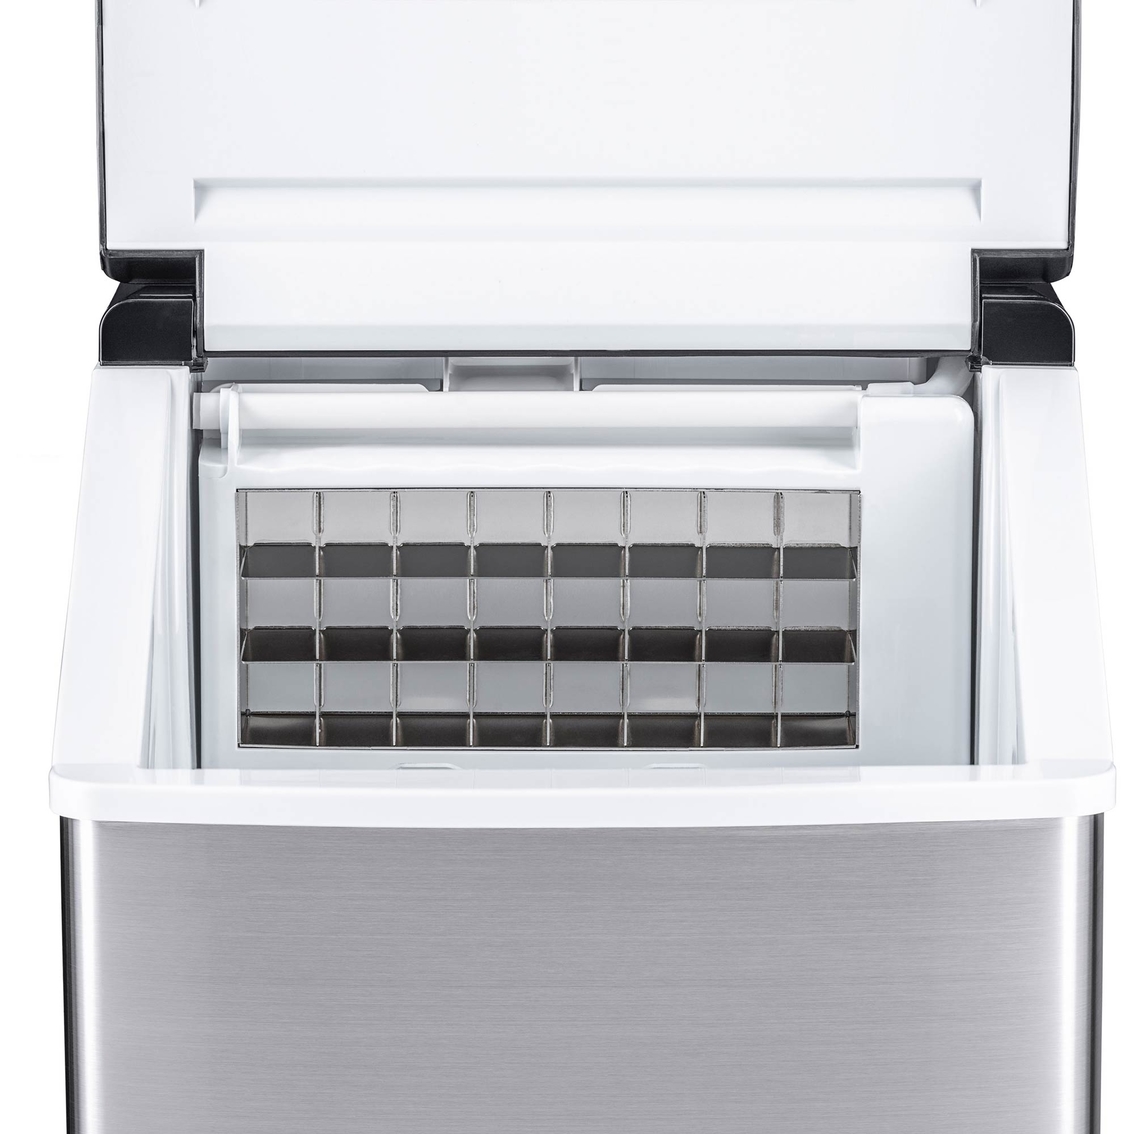 NewAir Counter Top Clear Ice Maker - Image 6 of 9